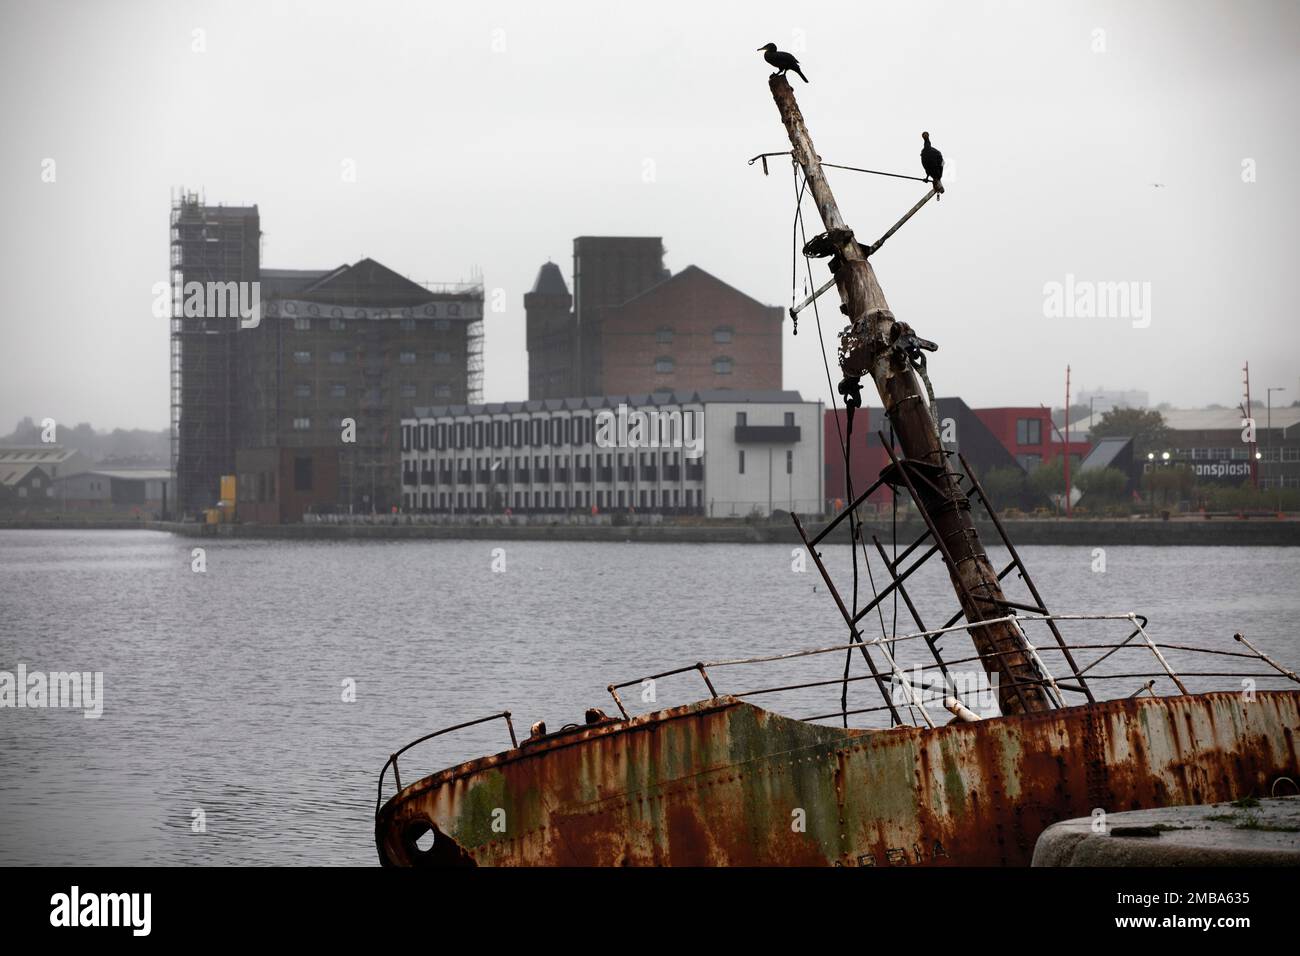 Looking across the East Float dock in Birkenhead towards an Urban Splash housing development at Wirral Waters Wirral Waters will form part of the Liverpool City Region Freeport, which was announced recently by the Conservative government. Stock Photo